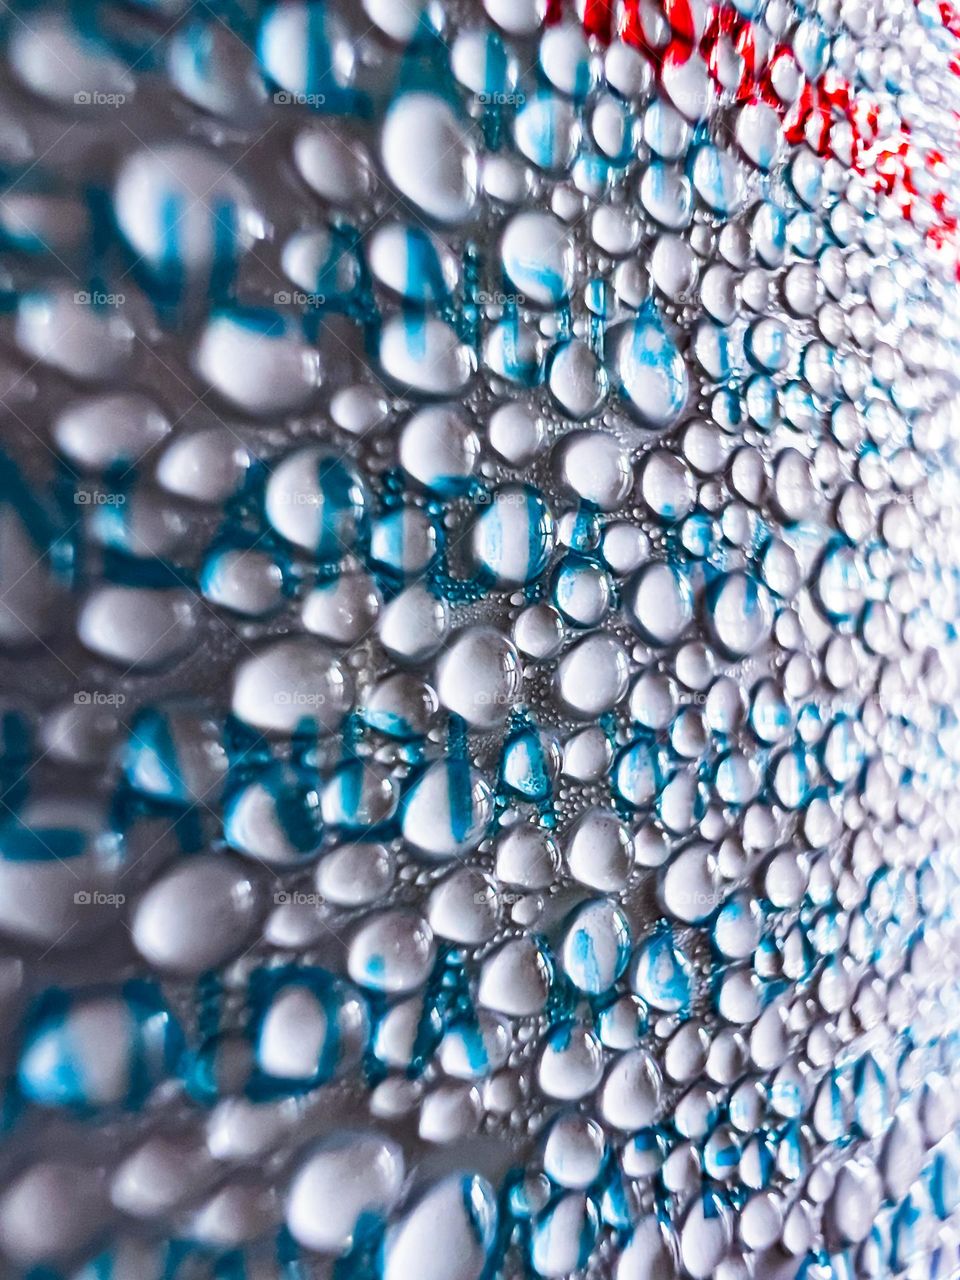 Close up photo of water droplets on a can of cold drink.